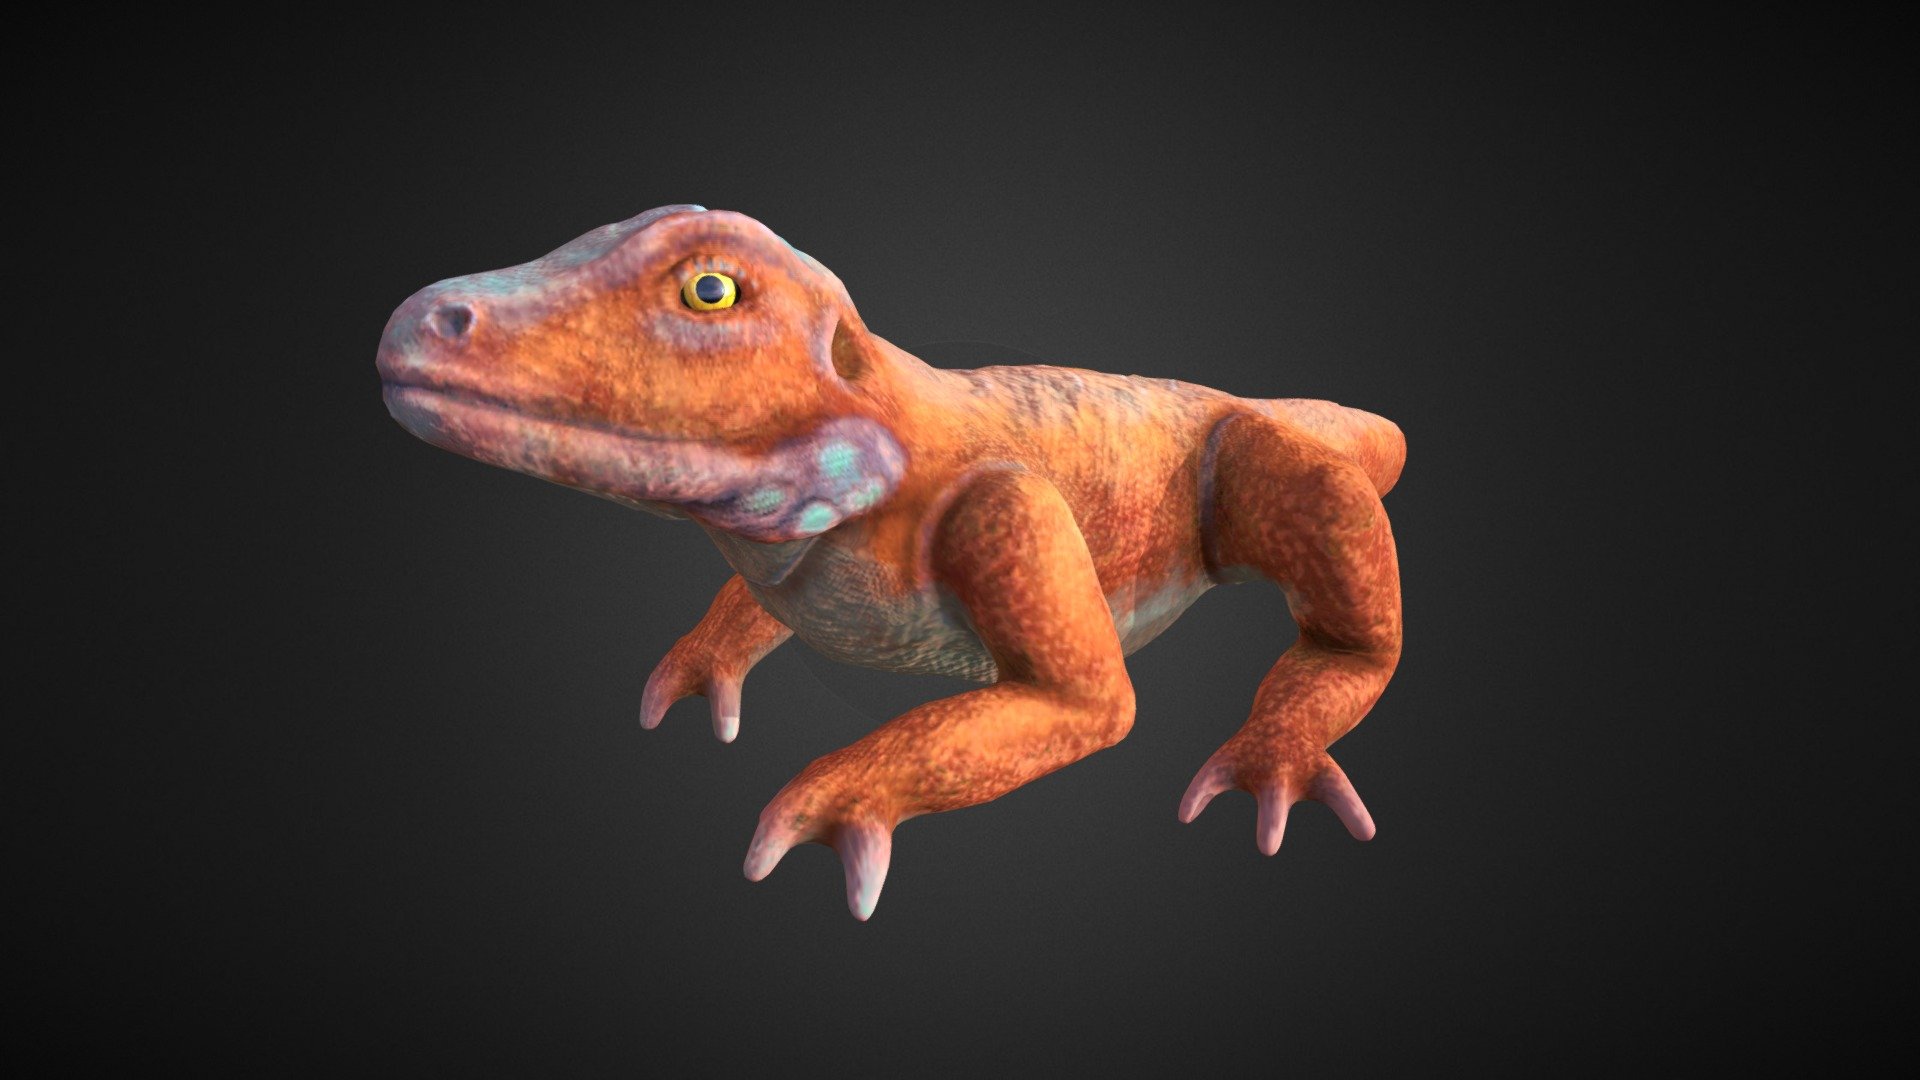 I sculpted and posed this lizard using ZBrush, I then textured it in Substance Painter. This is my first time using Substance Painter and ZBrush to create and texture a creature 3d model